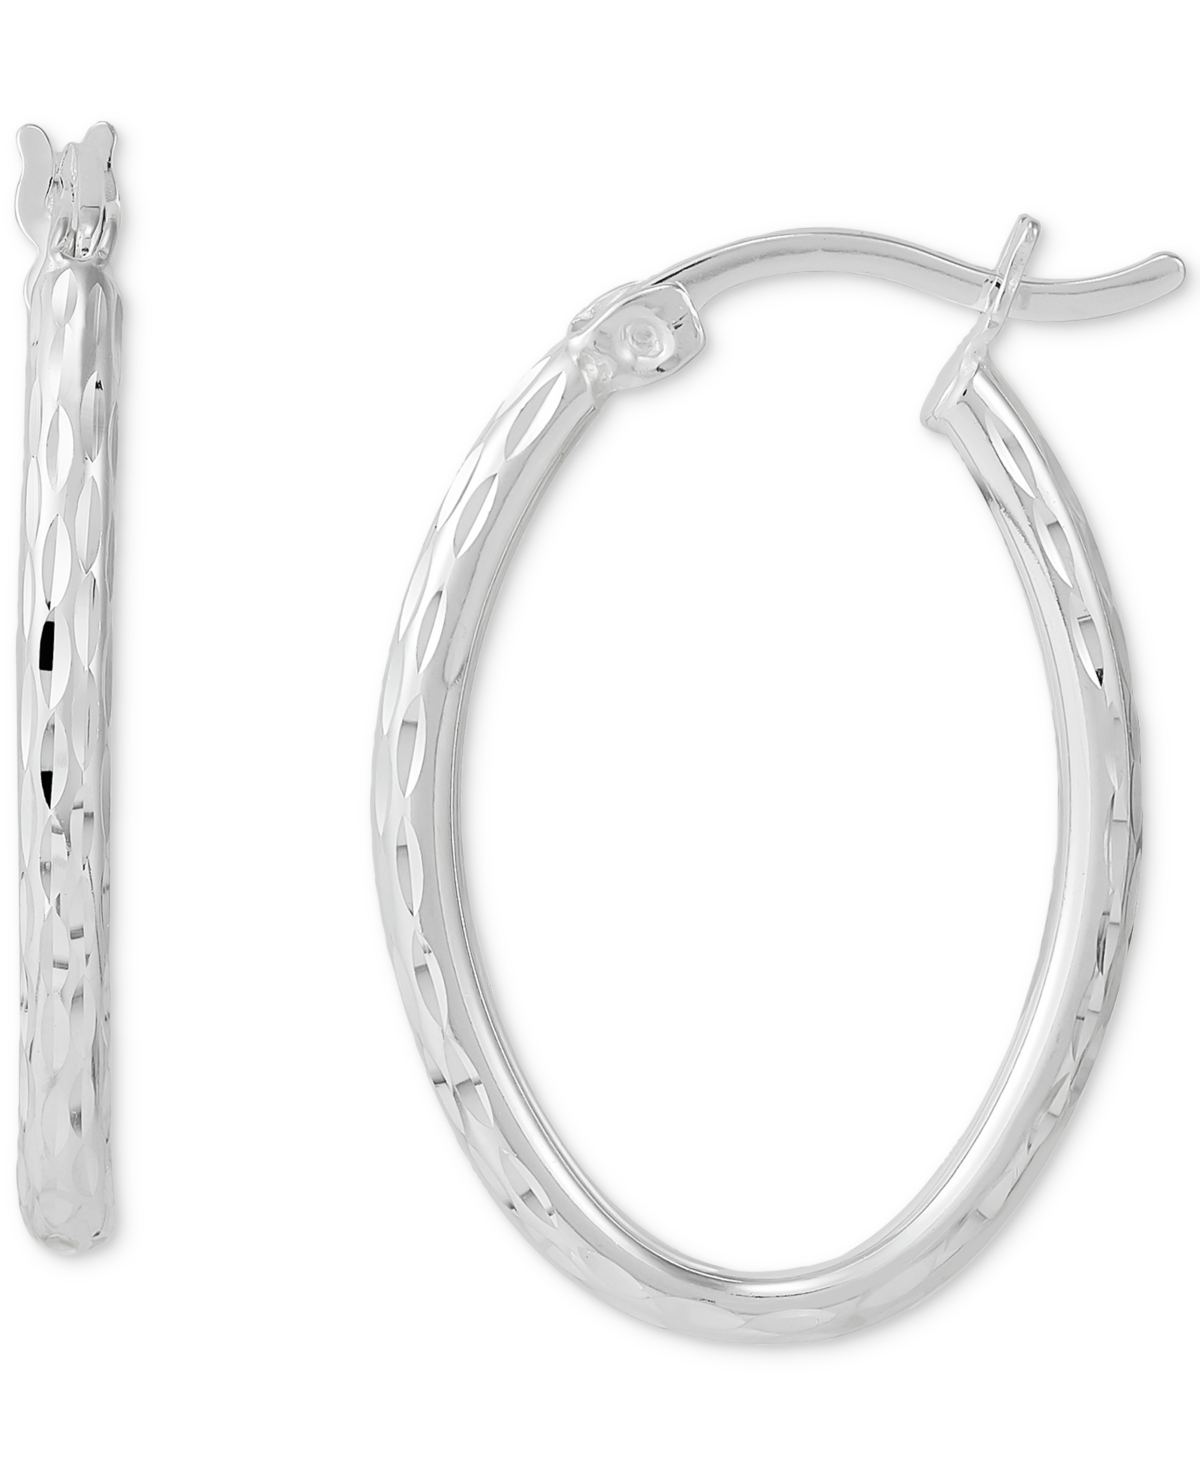 Textured Oval Hoop Earrings 25mm, Created for Macy's - Silver